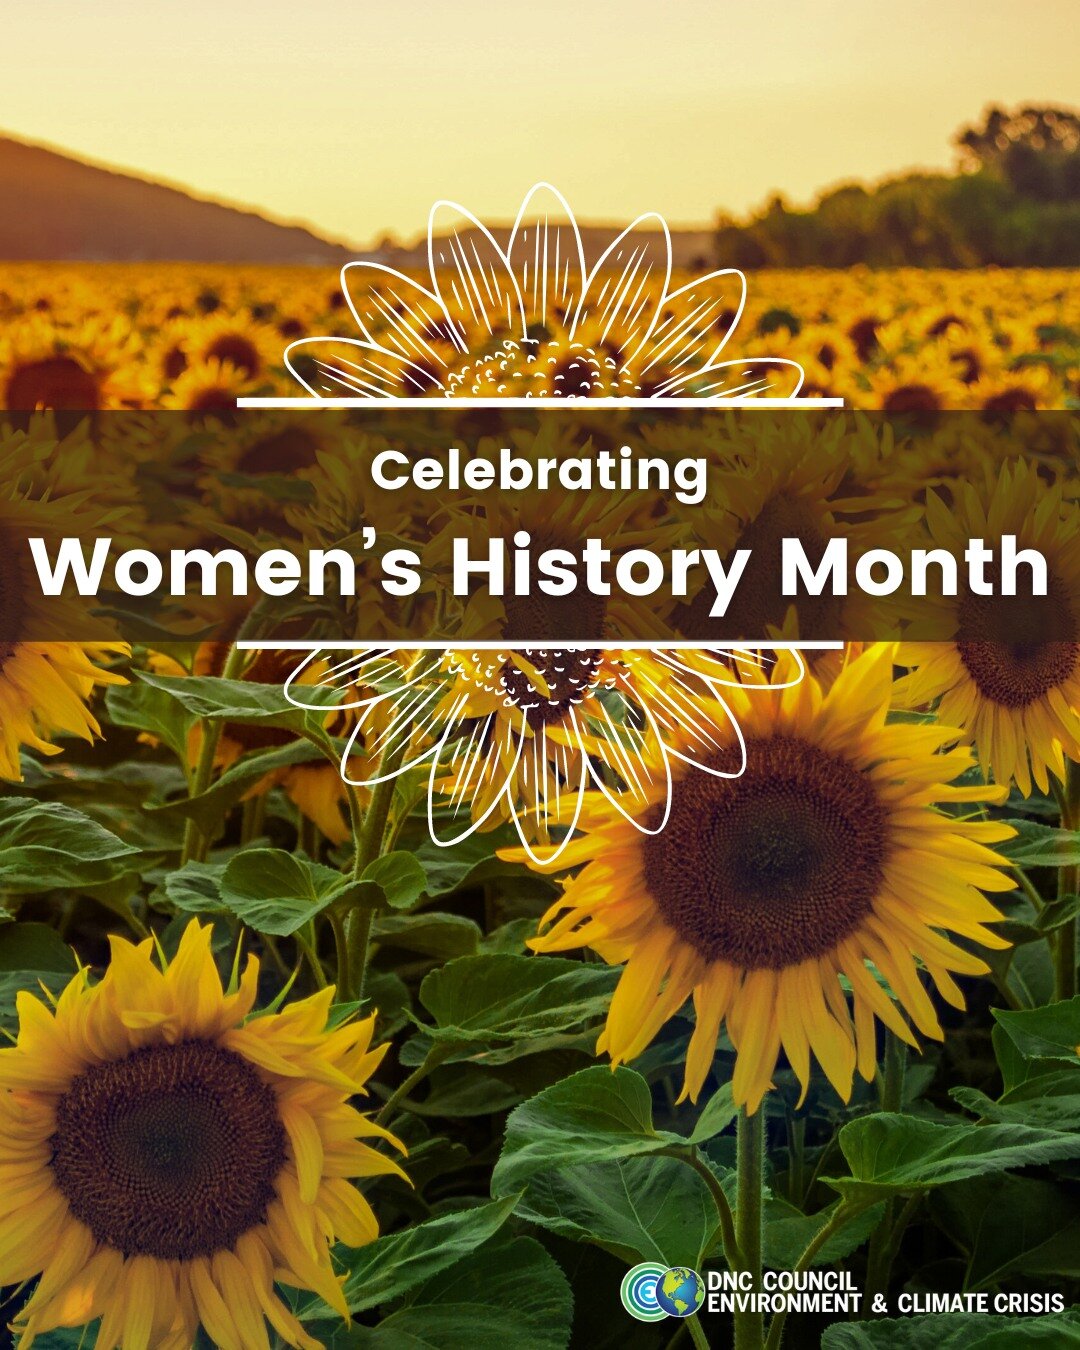 💜 From Rachel Carson to Peggy Shepard, and from Agnes Baker-Pilgrim to Grace Lee Boggs: Women's voices, courage and leadership have long been at the core of the climate movement.
.
.
.
.
#WomensHistoryMonth #WomenForThePlanet #ClimateCrisis #Climate